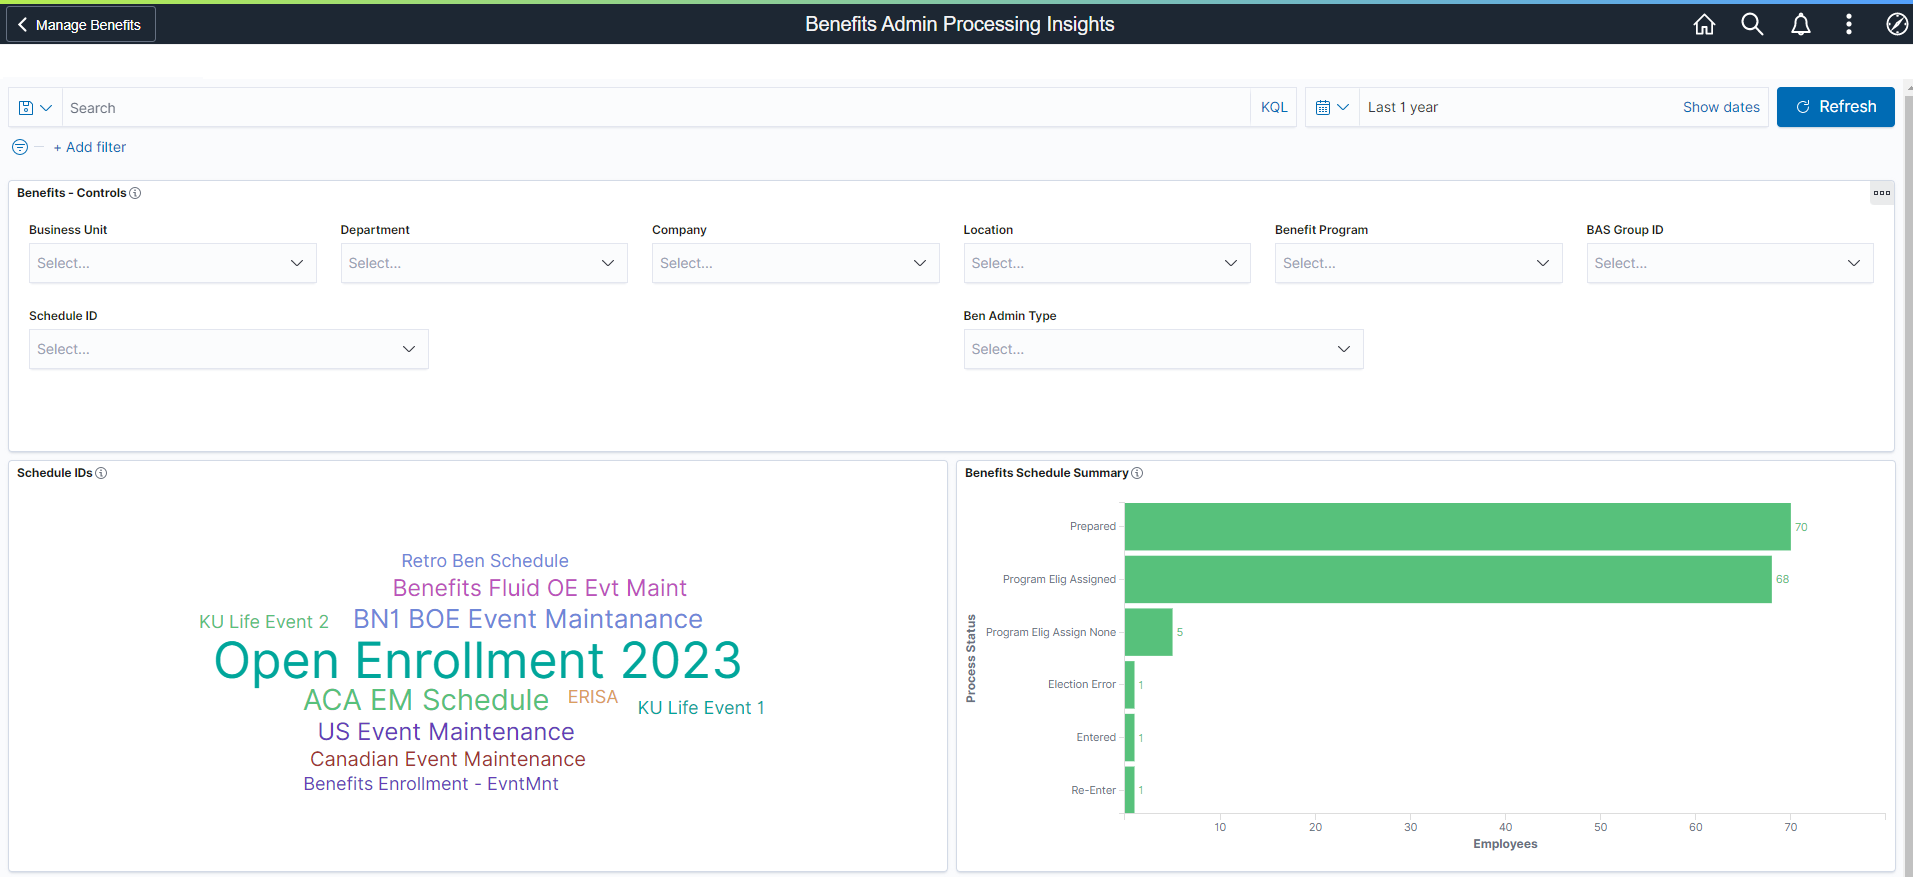 Ben Admin Processing Insights Dashboard (Page 1 of 2)